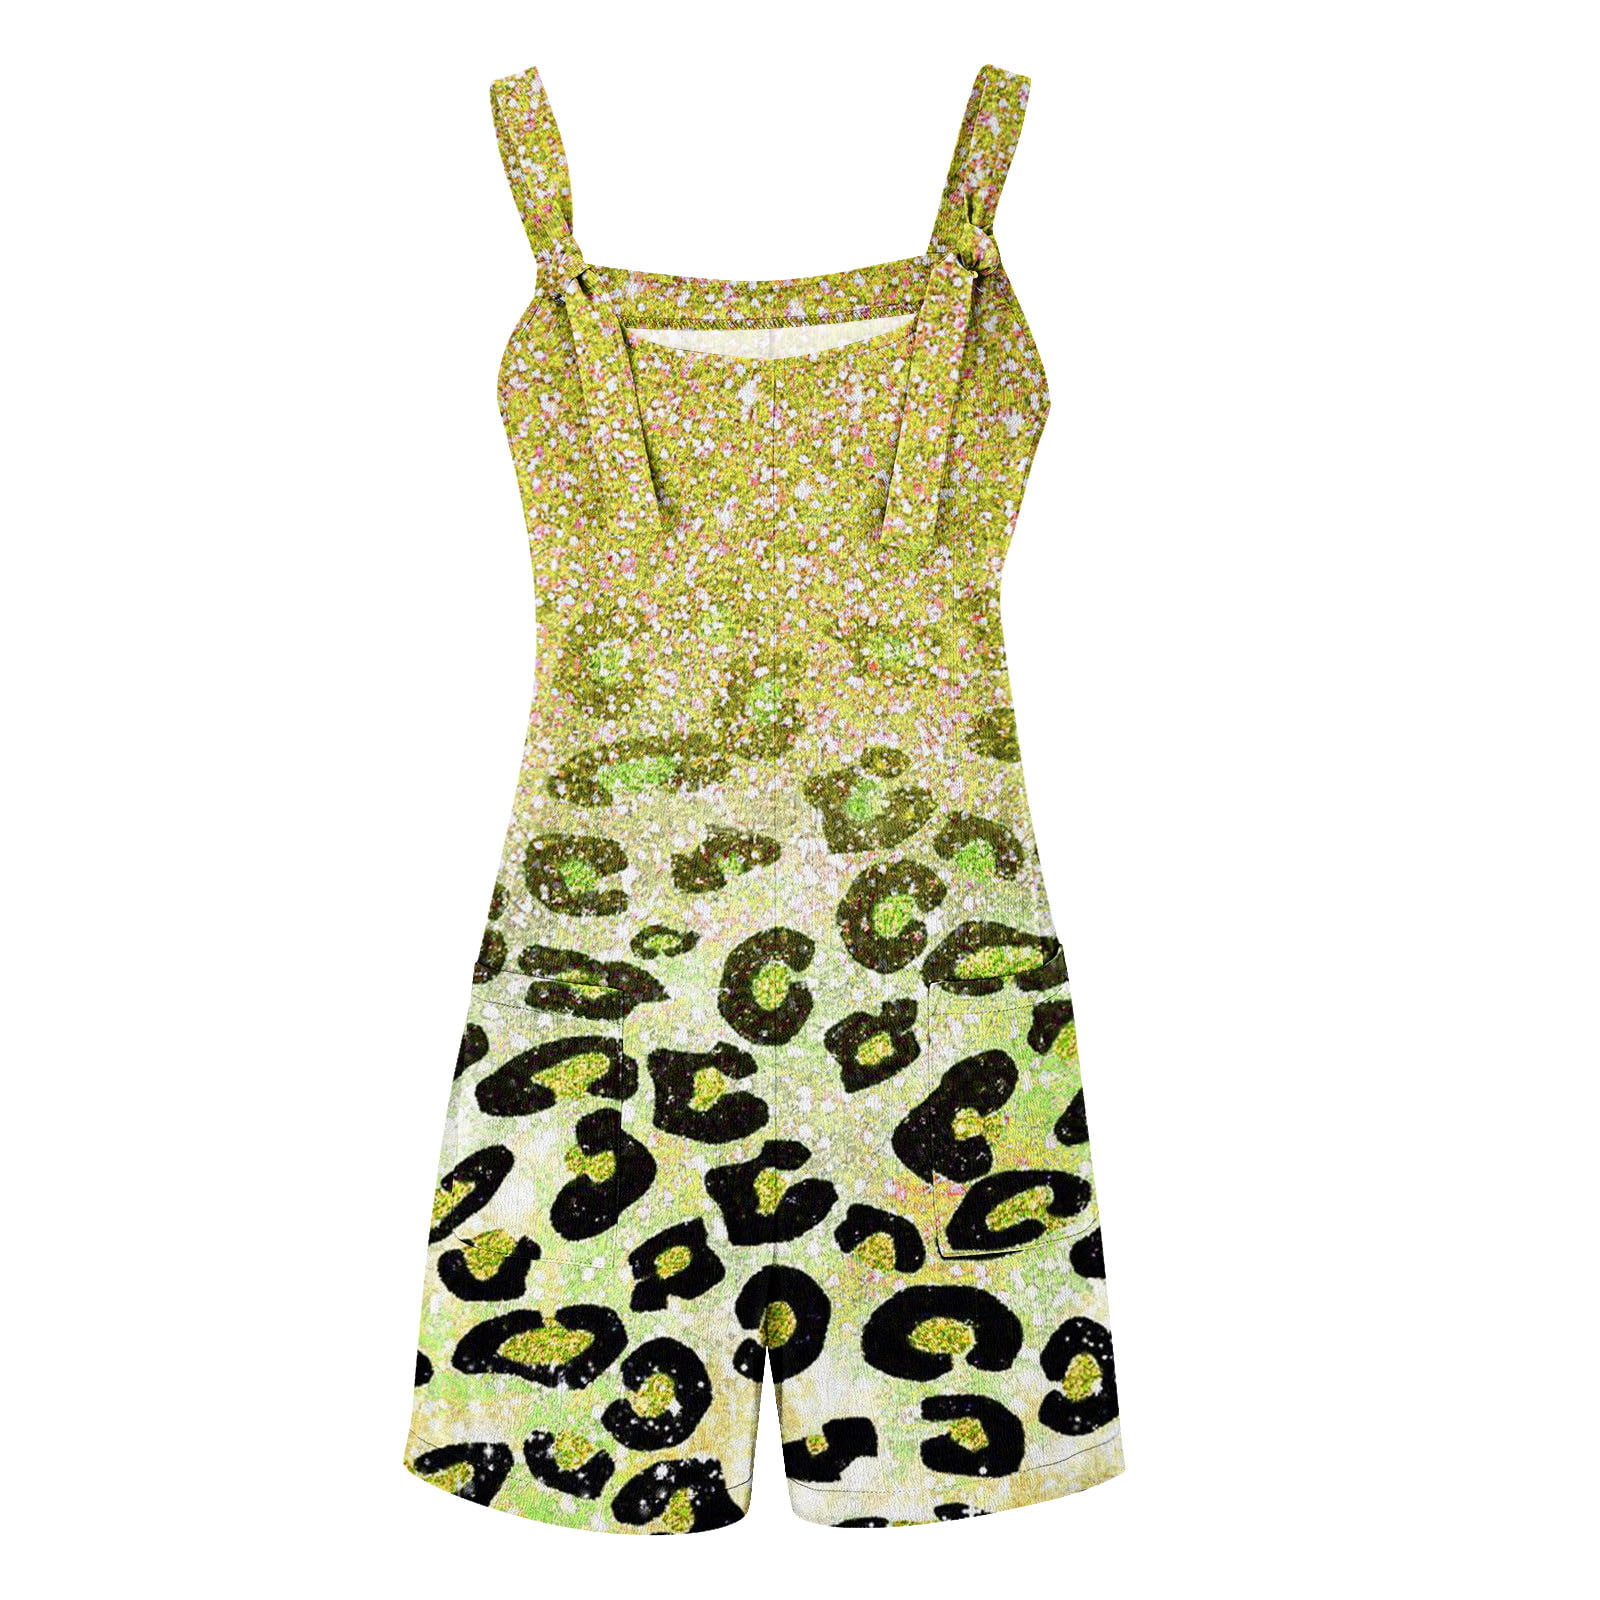 Kauounady Festival Shorts Overall Shorts for Women Shorts for